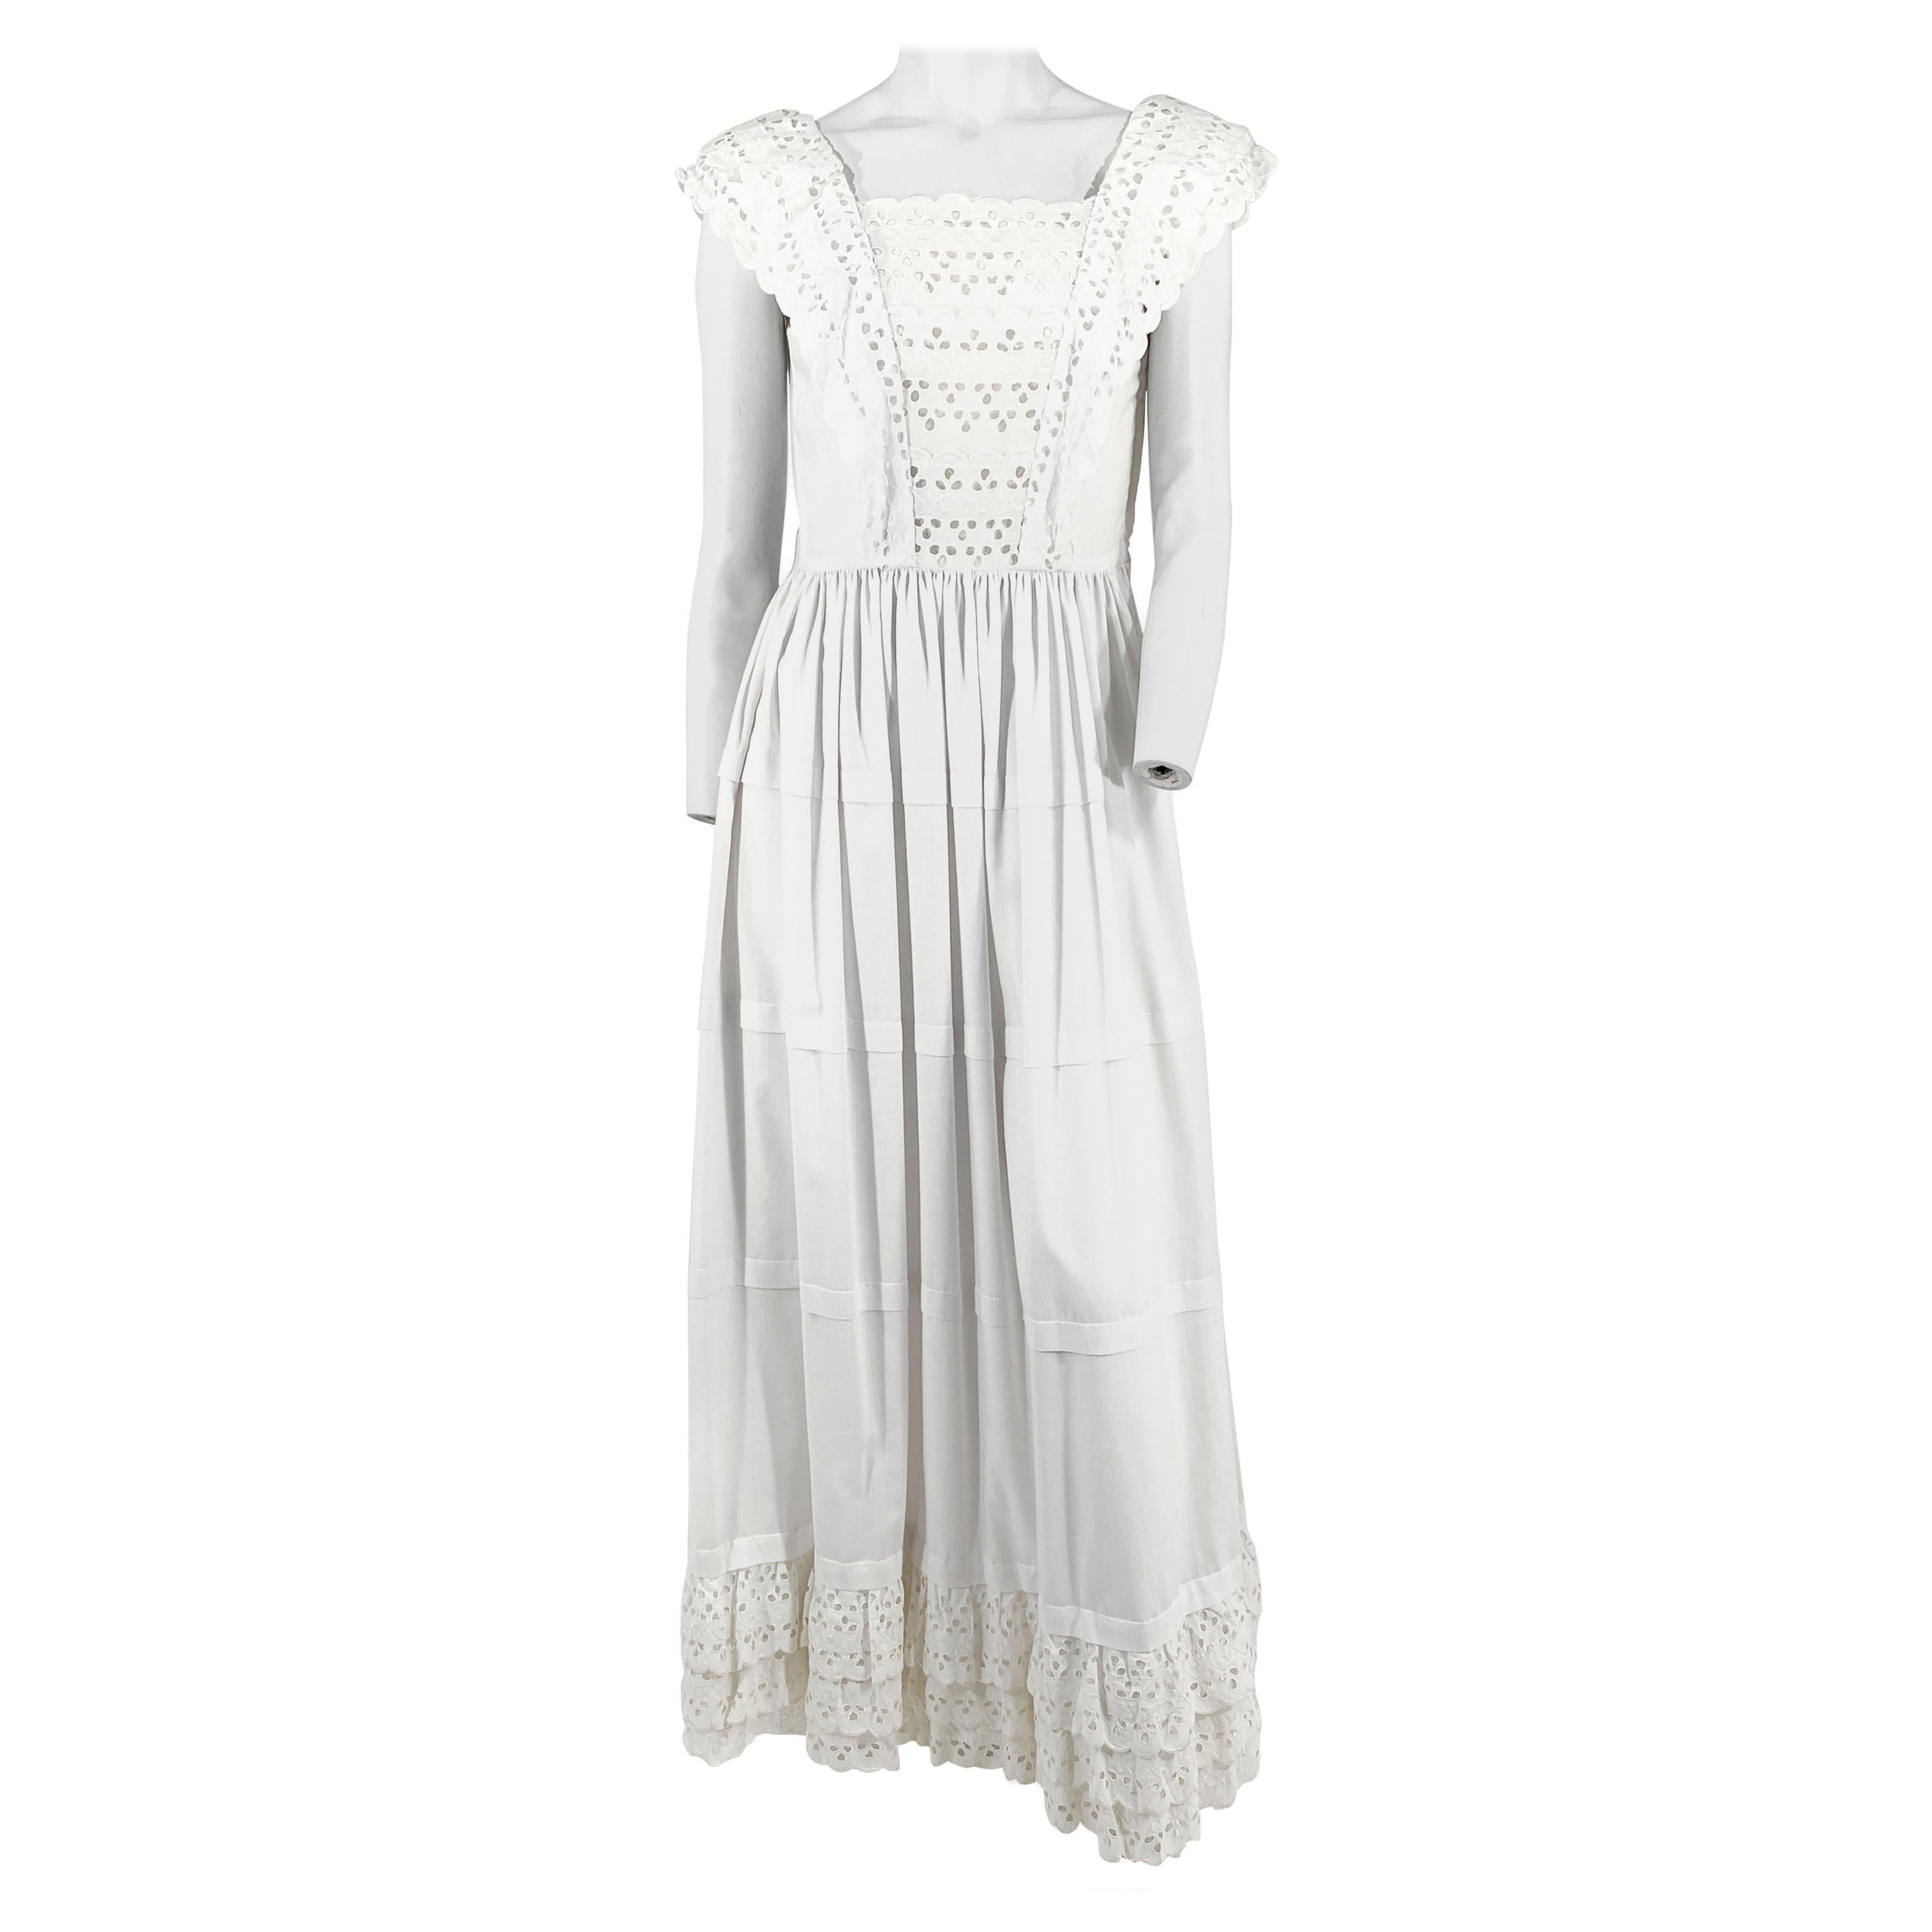 1970s White Cotton Eyelet Cottage Dress For Sale